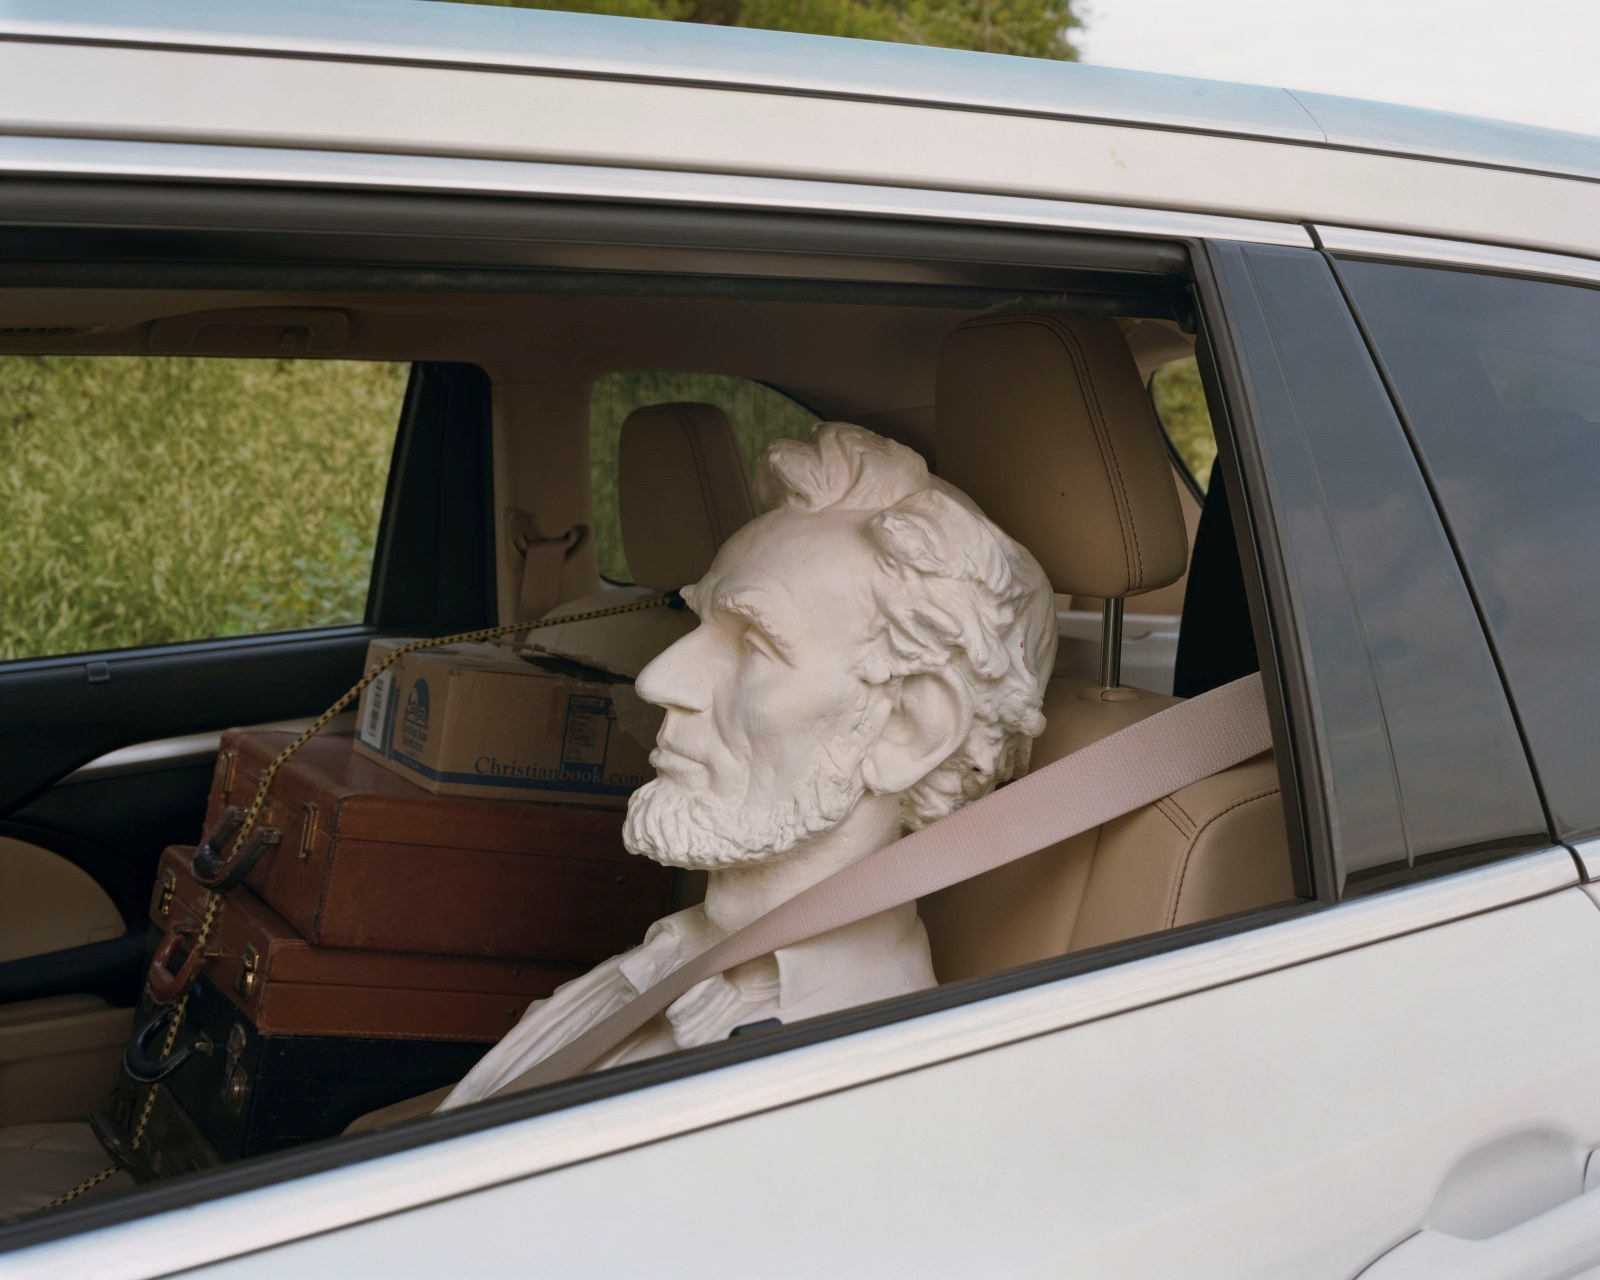 A sculpture of Abe Lincoln strapped into the back seat of a car with small briefcases stacked in the car next to him